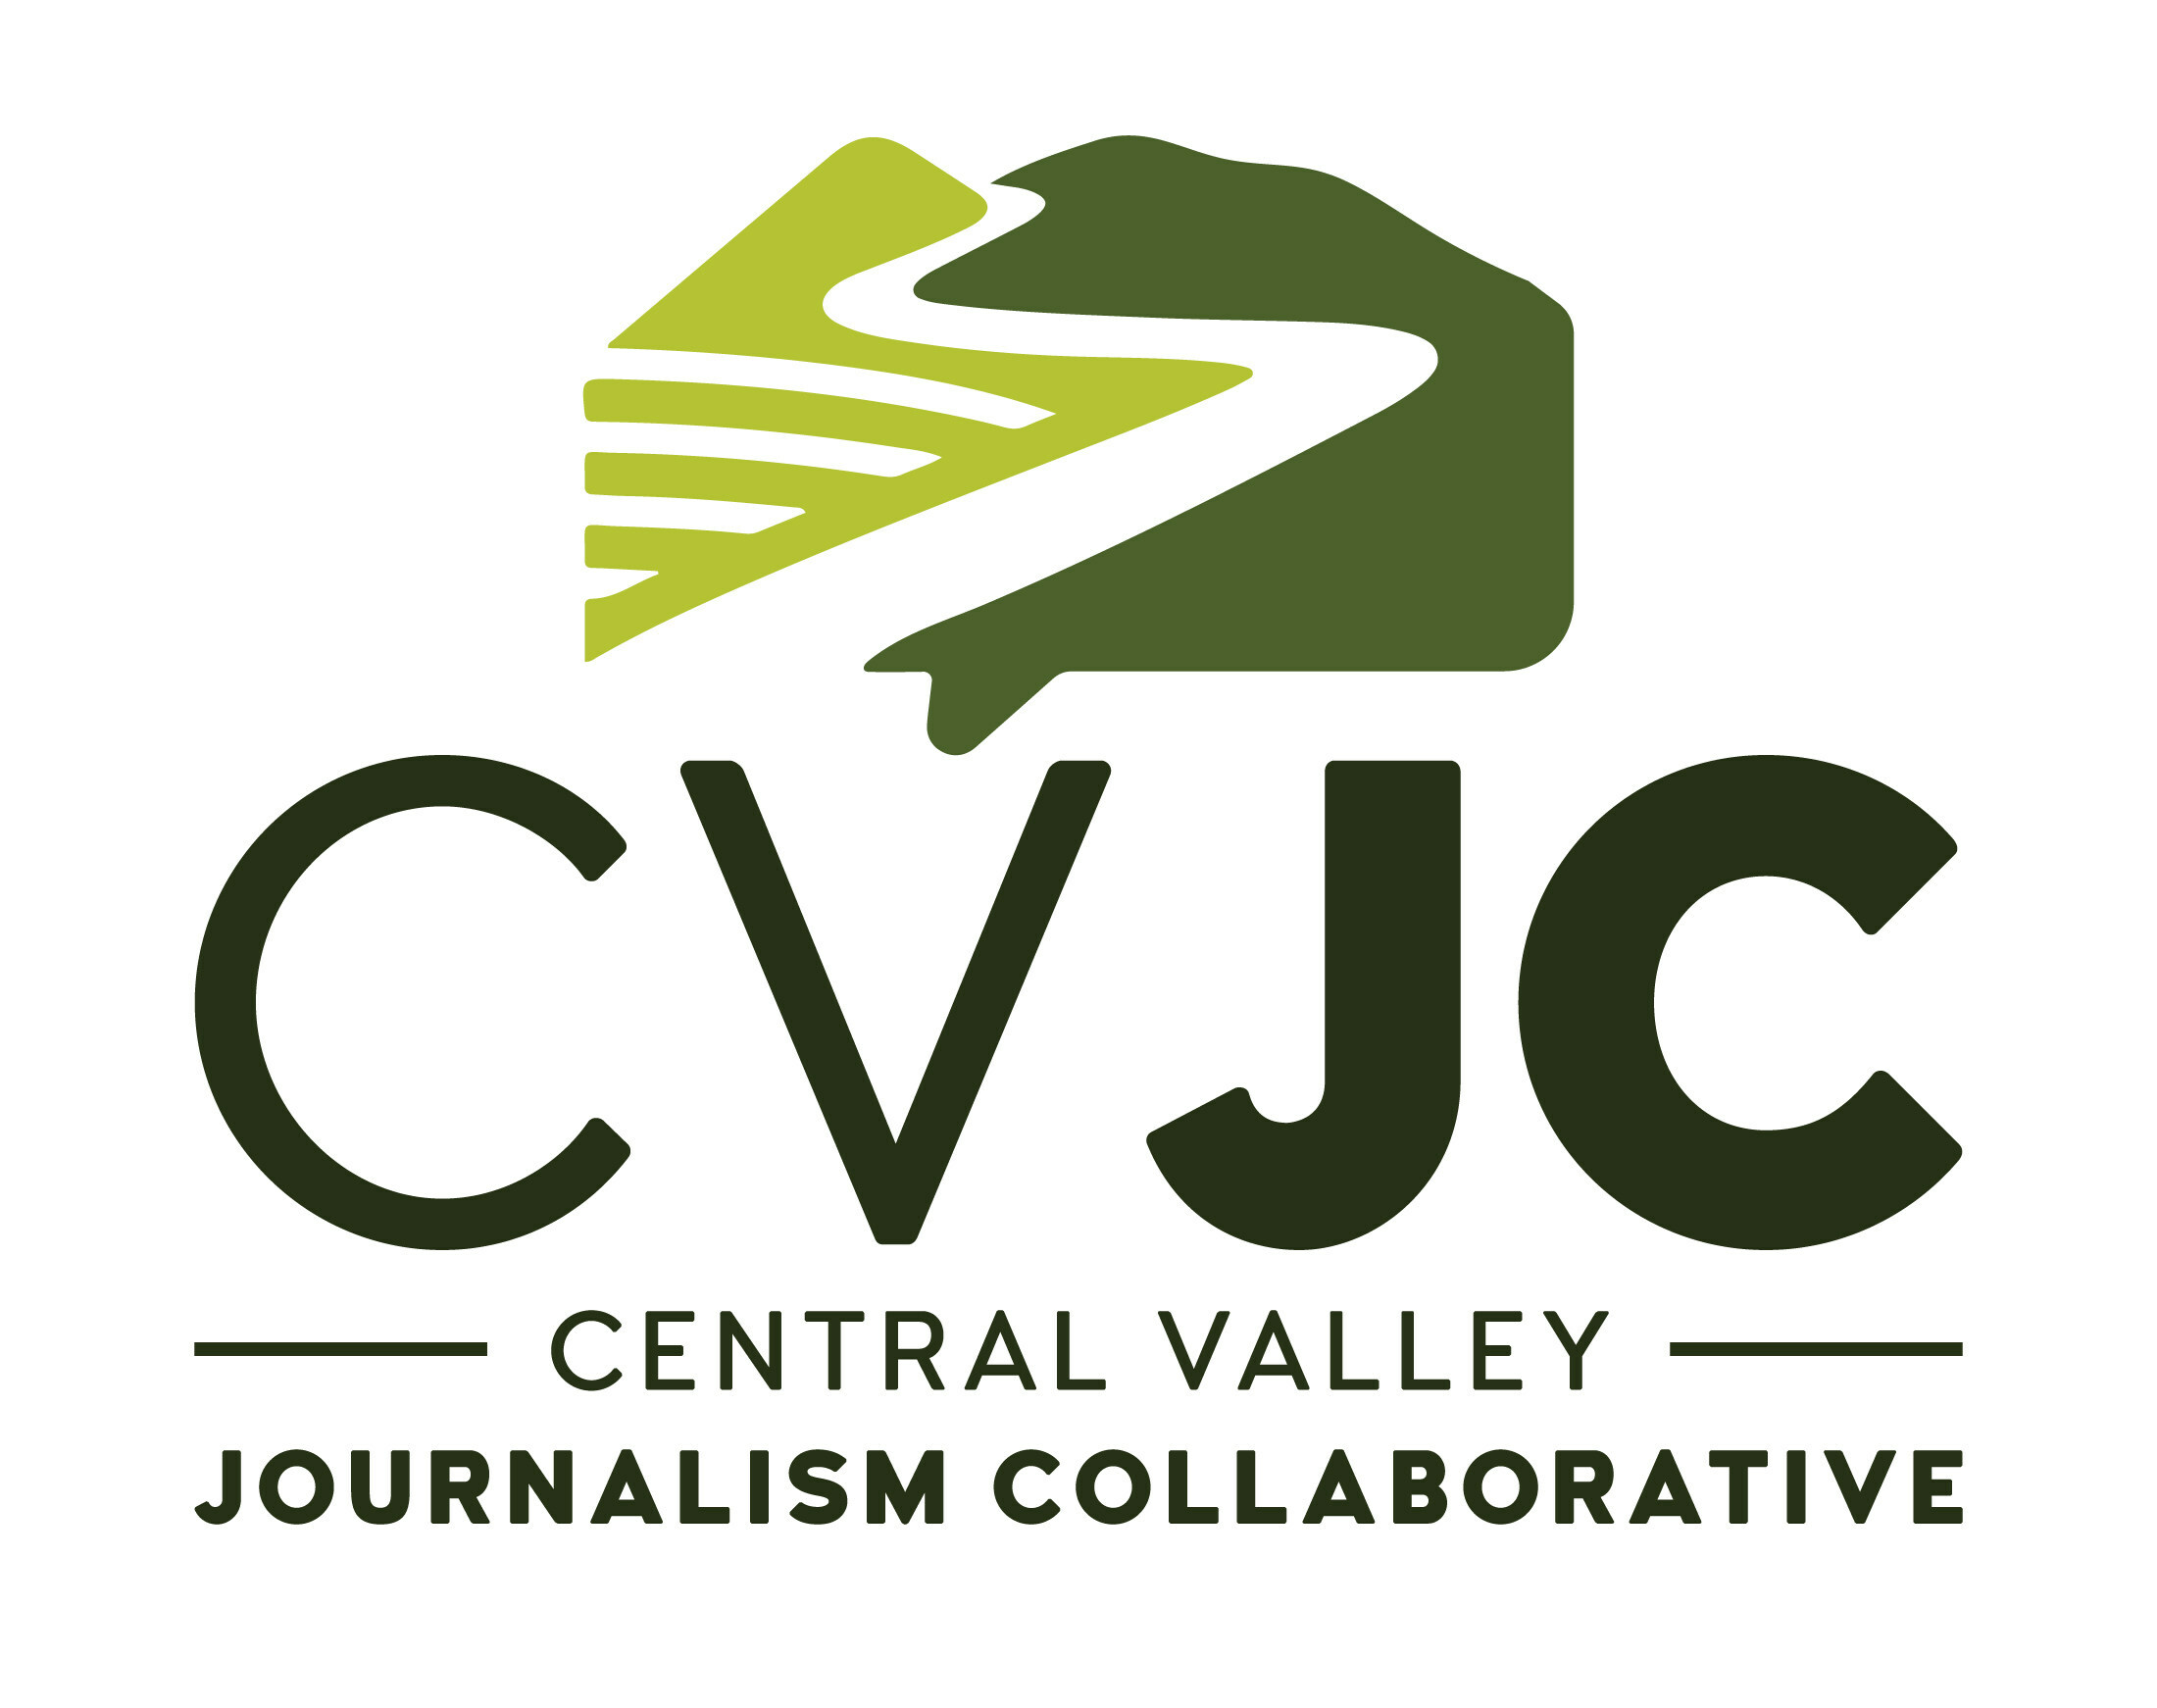 Central Valley Journalism Collaborative